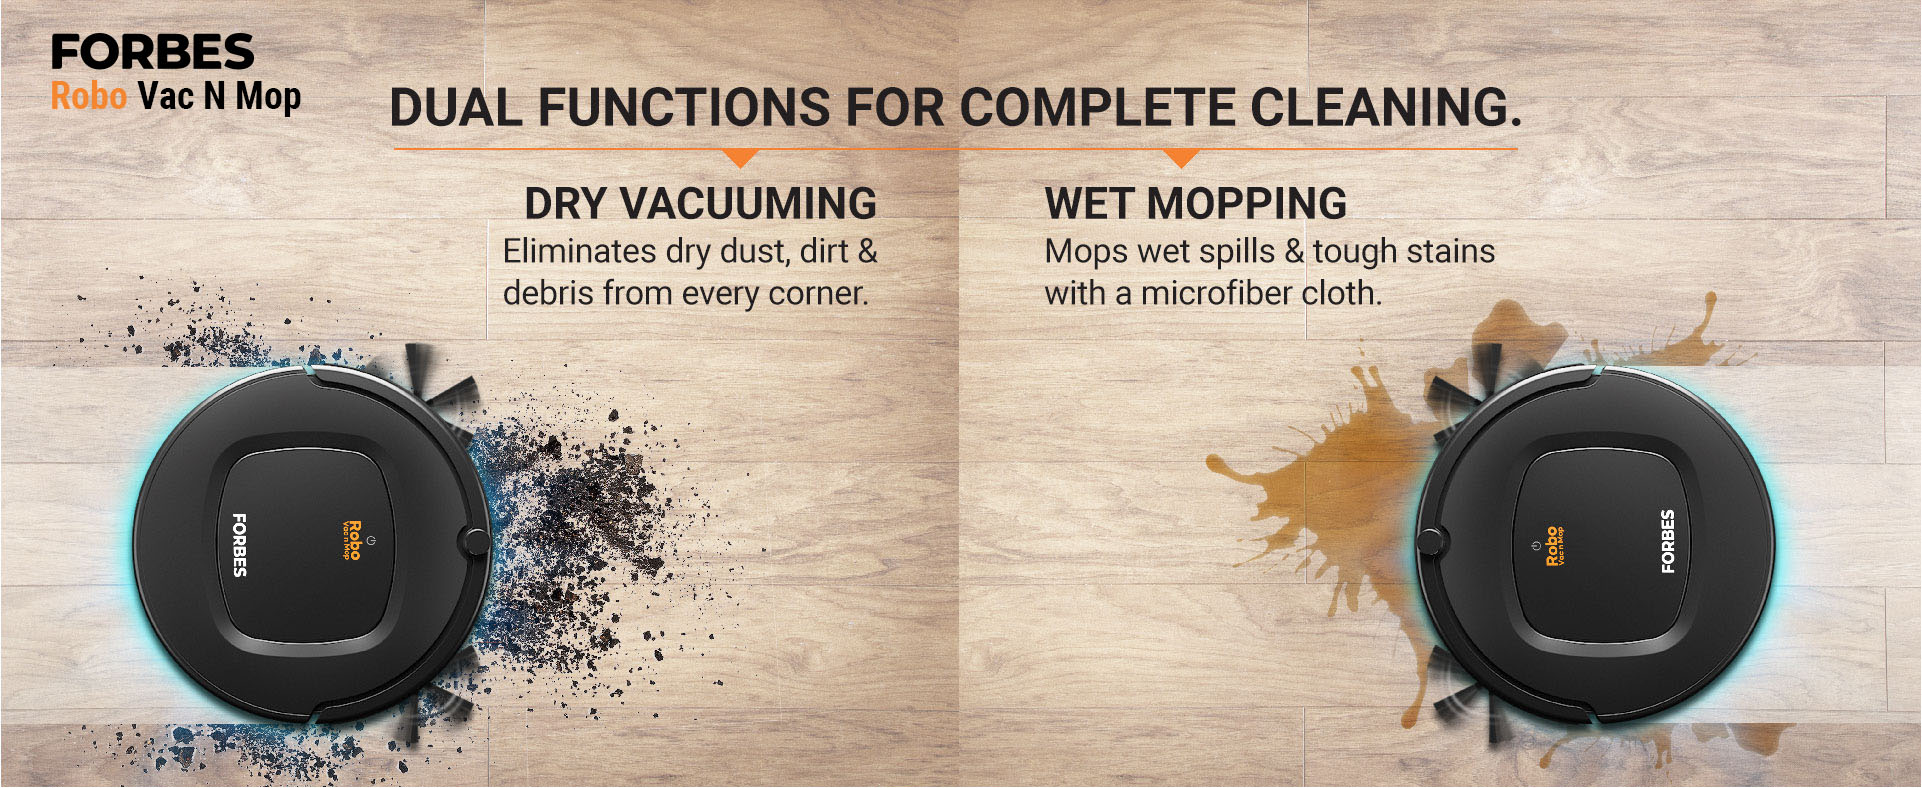 Dry vacuuming Eliminates dry dust, dirt & debris from every corner. Wet Mopping Mops wet spills & tough stains with a microfiber cloth.